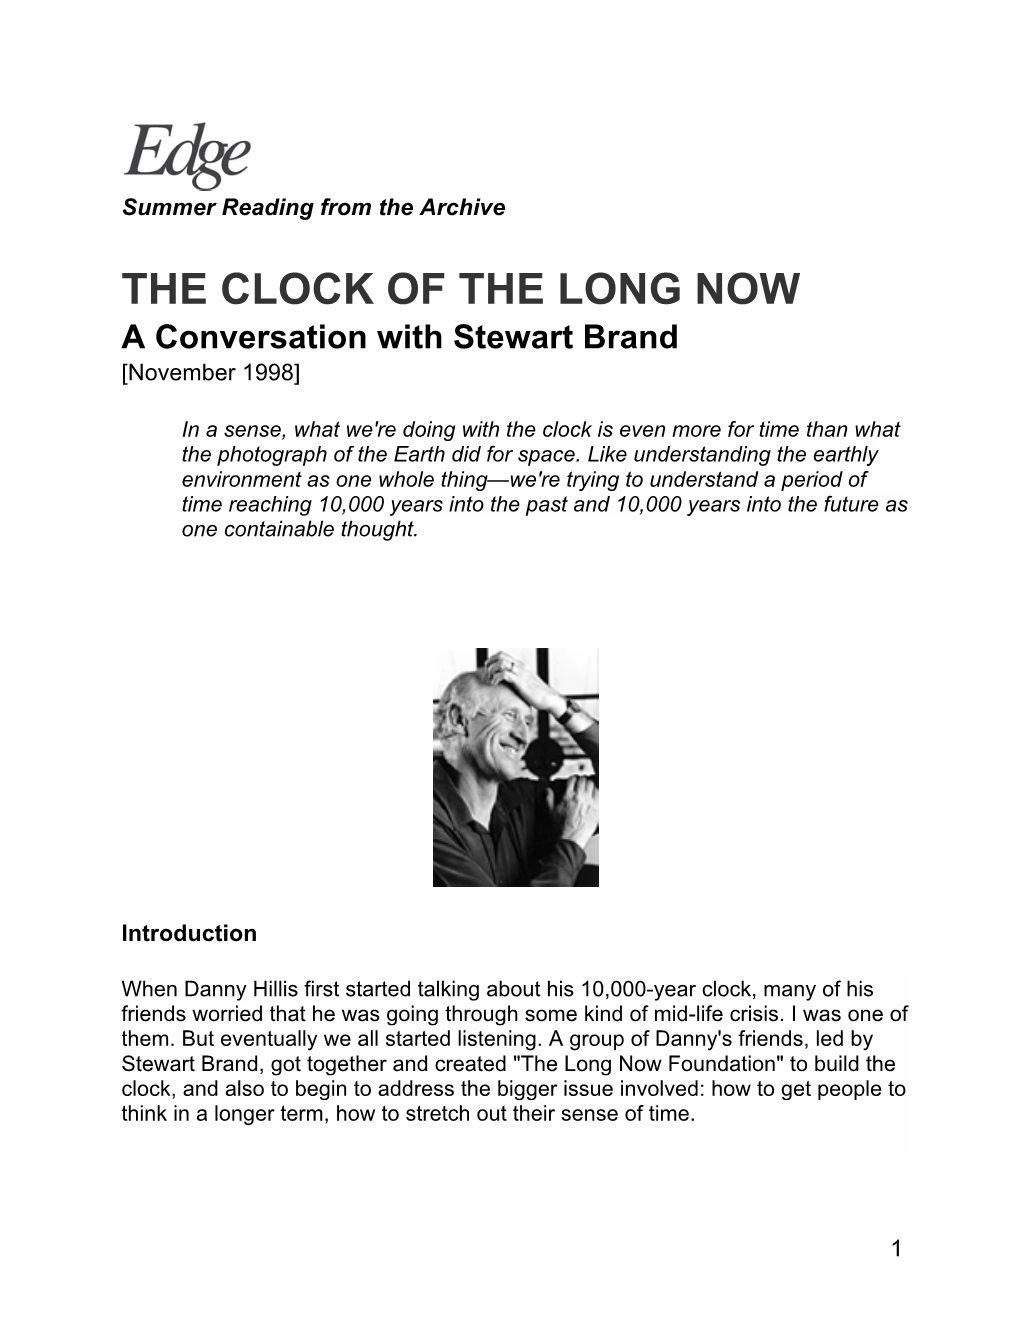 THE CLOCK of the LONG NOW a Conversation with Stewart Brand [November 1998]